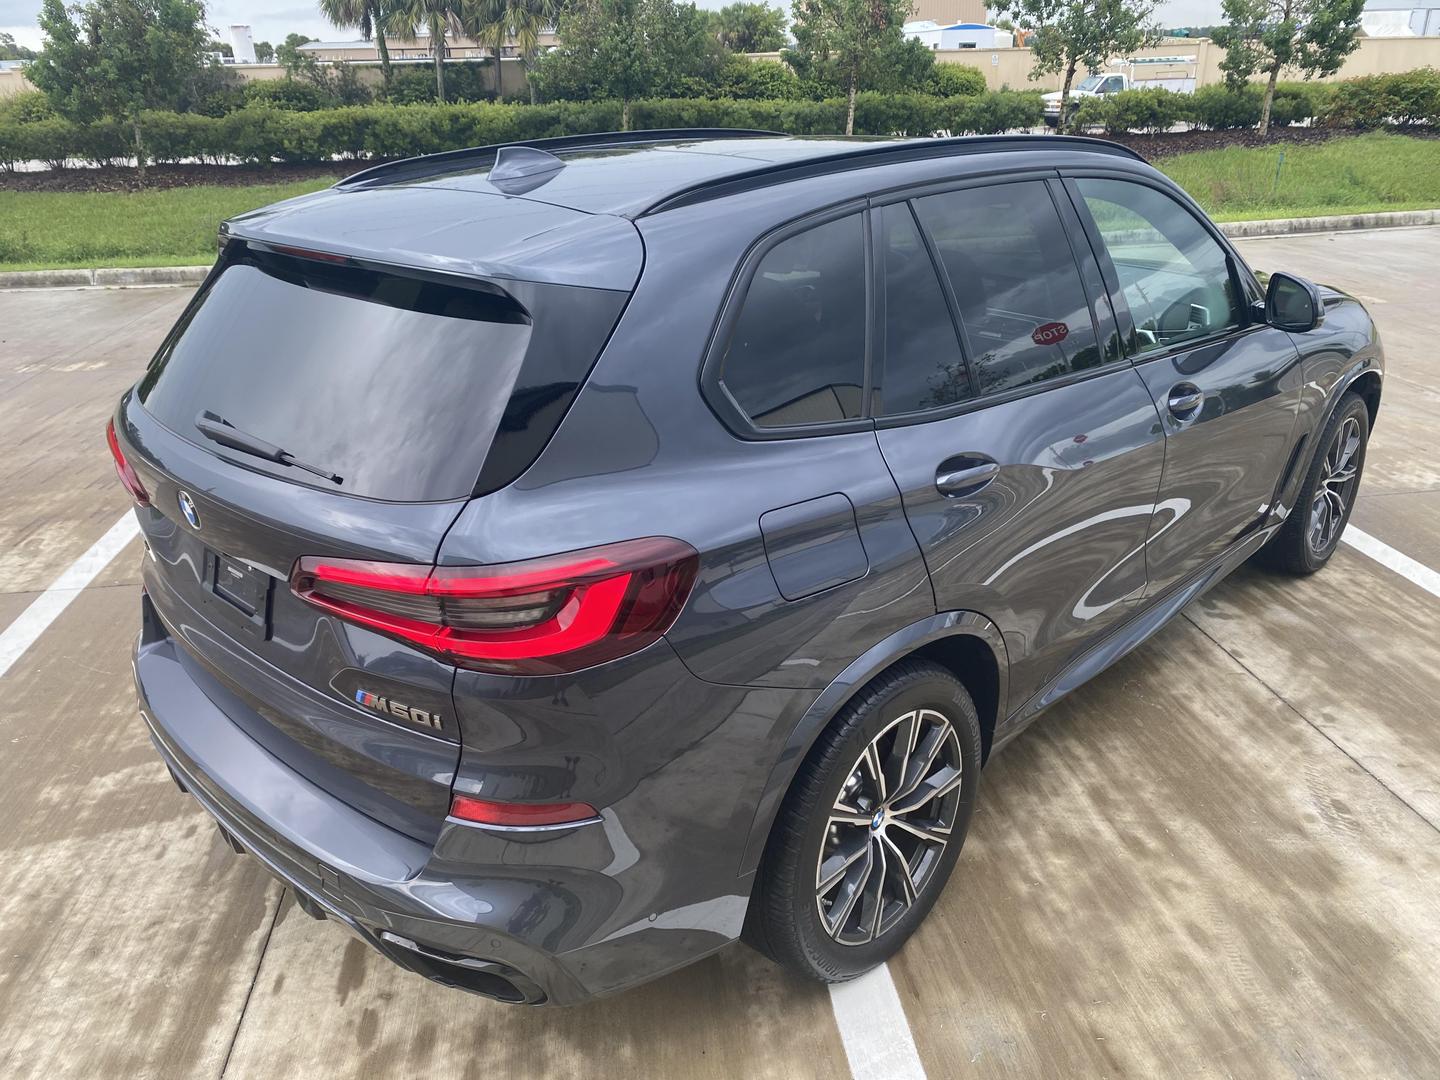 USED BMW X5 2020 for sale in Fort Myers, FL | South Car Motorsports